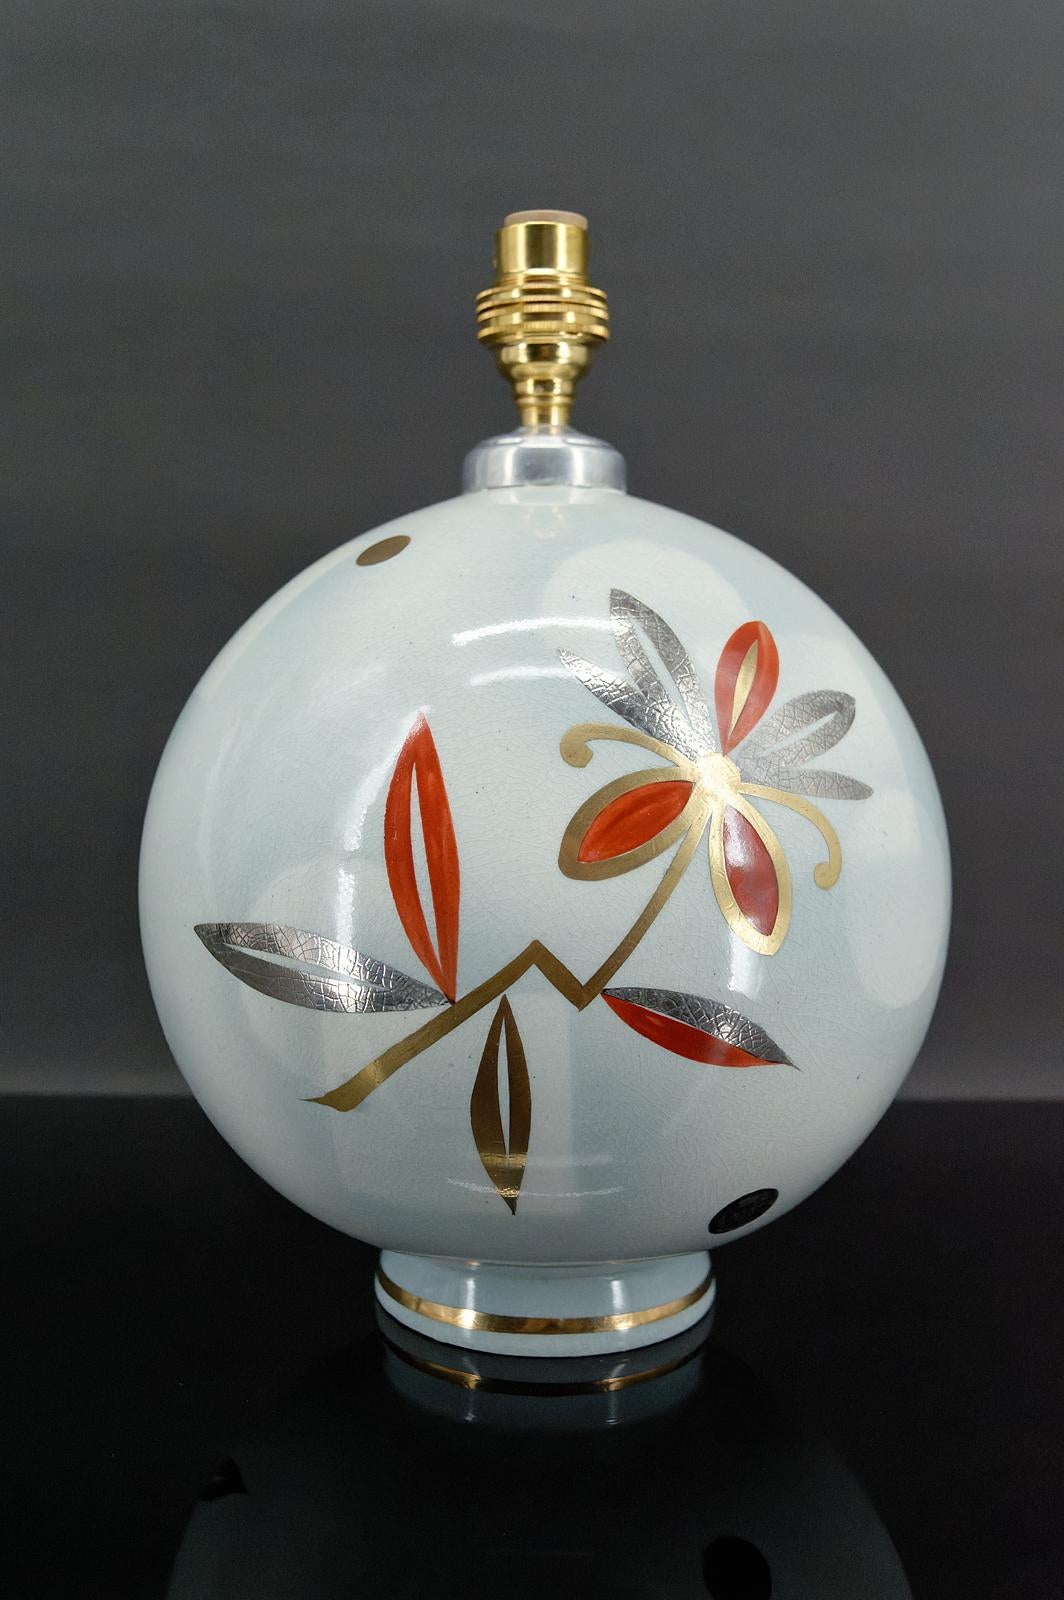 Ball lamp by the Faïencerie de Sainte Radegonde for Primavera.
Art Deco, France, circa 1925

In white ceramic, decorated with stylized flowers in red, gold and silver tones.

Art Deco, France, circa 1925.

In excellent condition, new